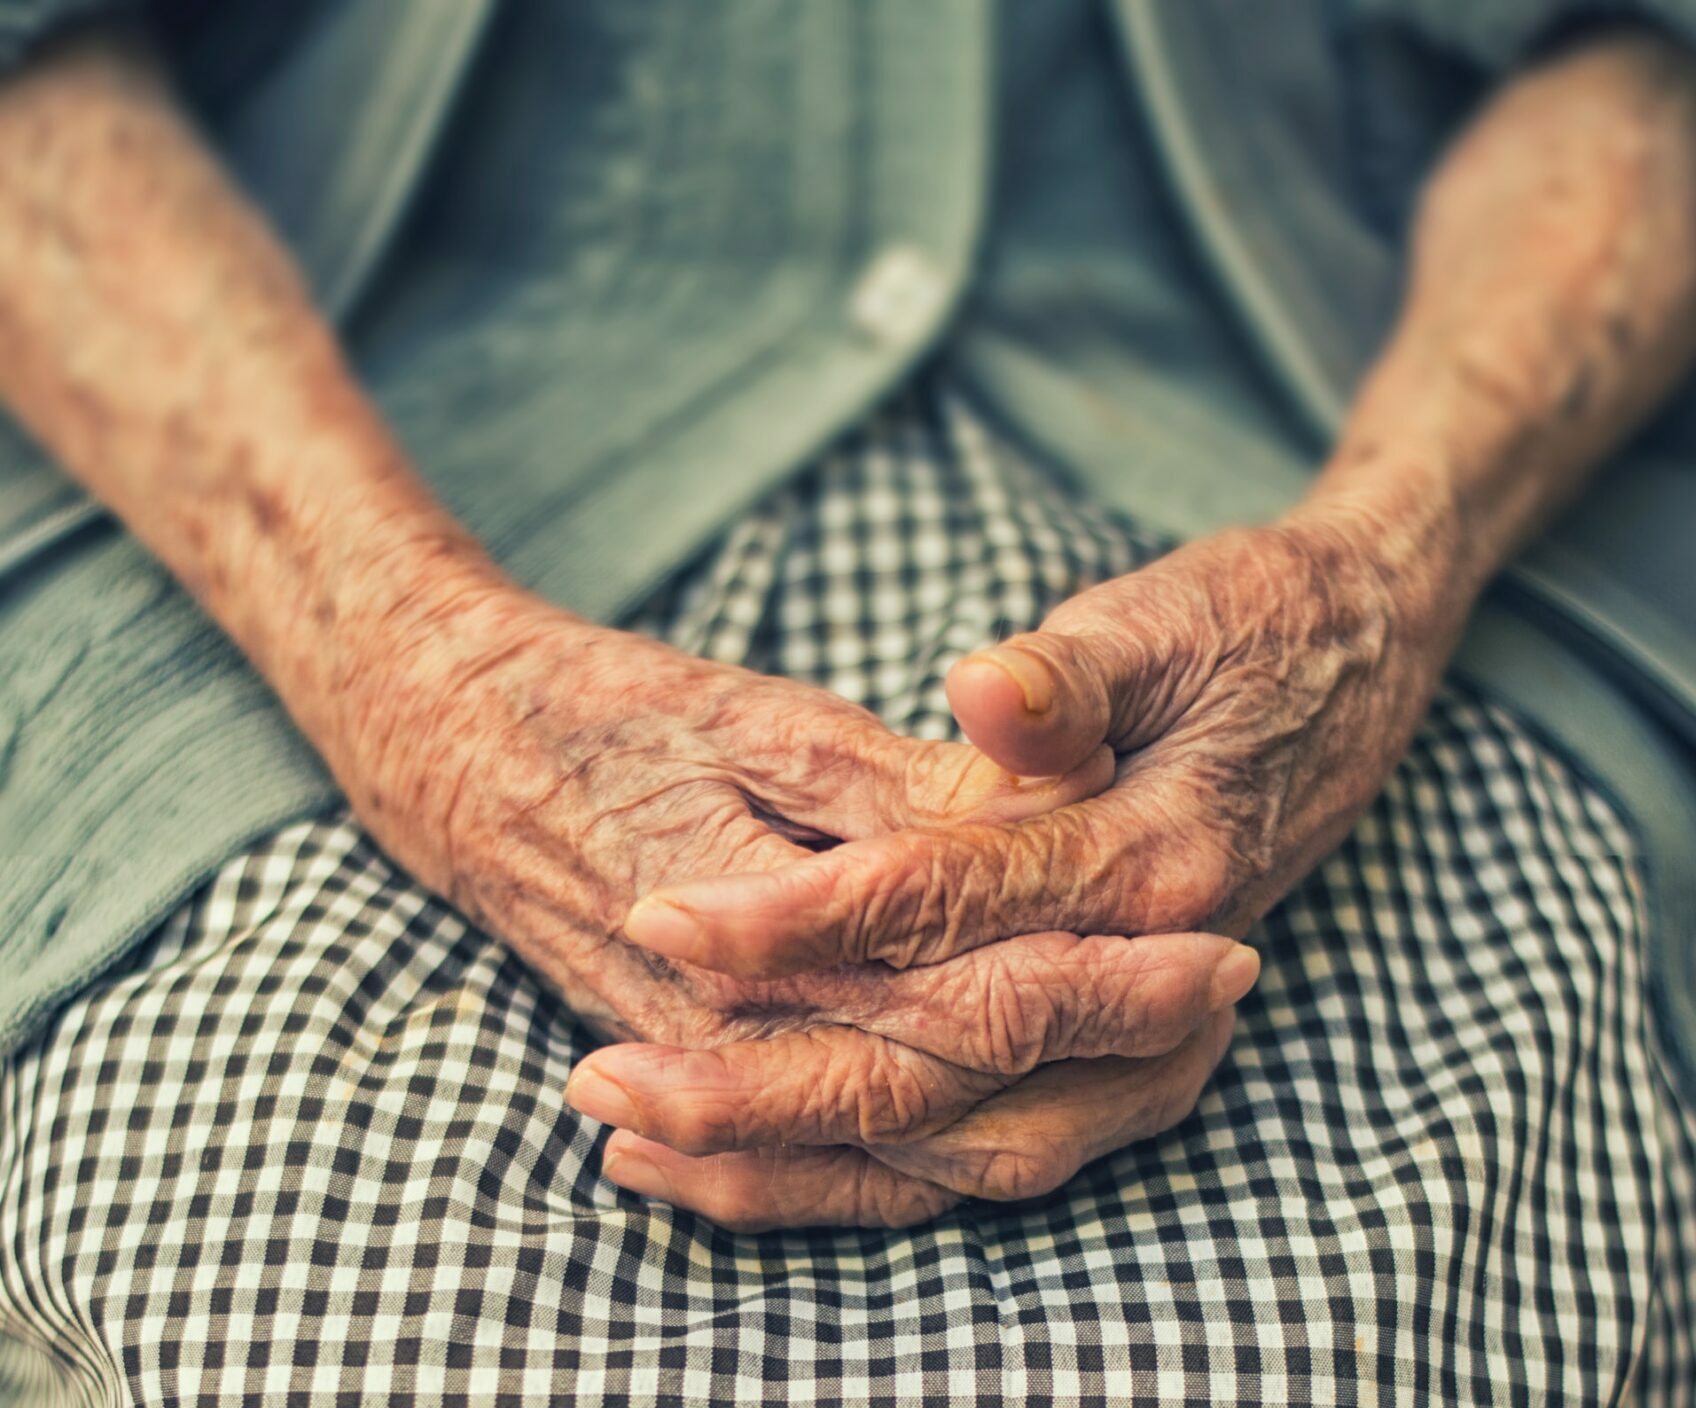 A picture of an aged woman;s hands